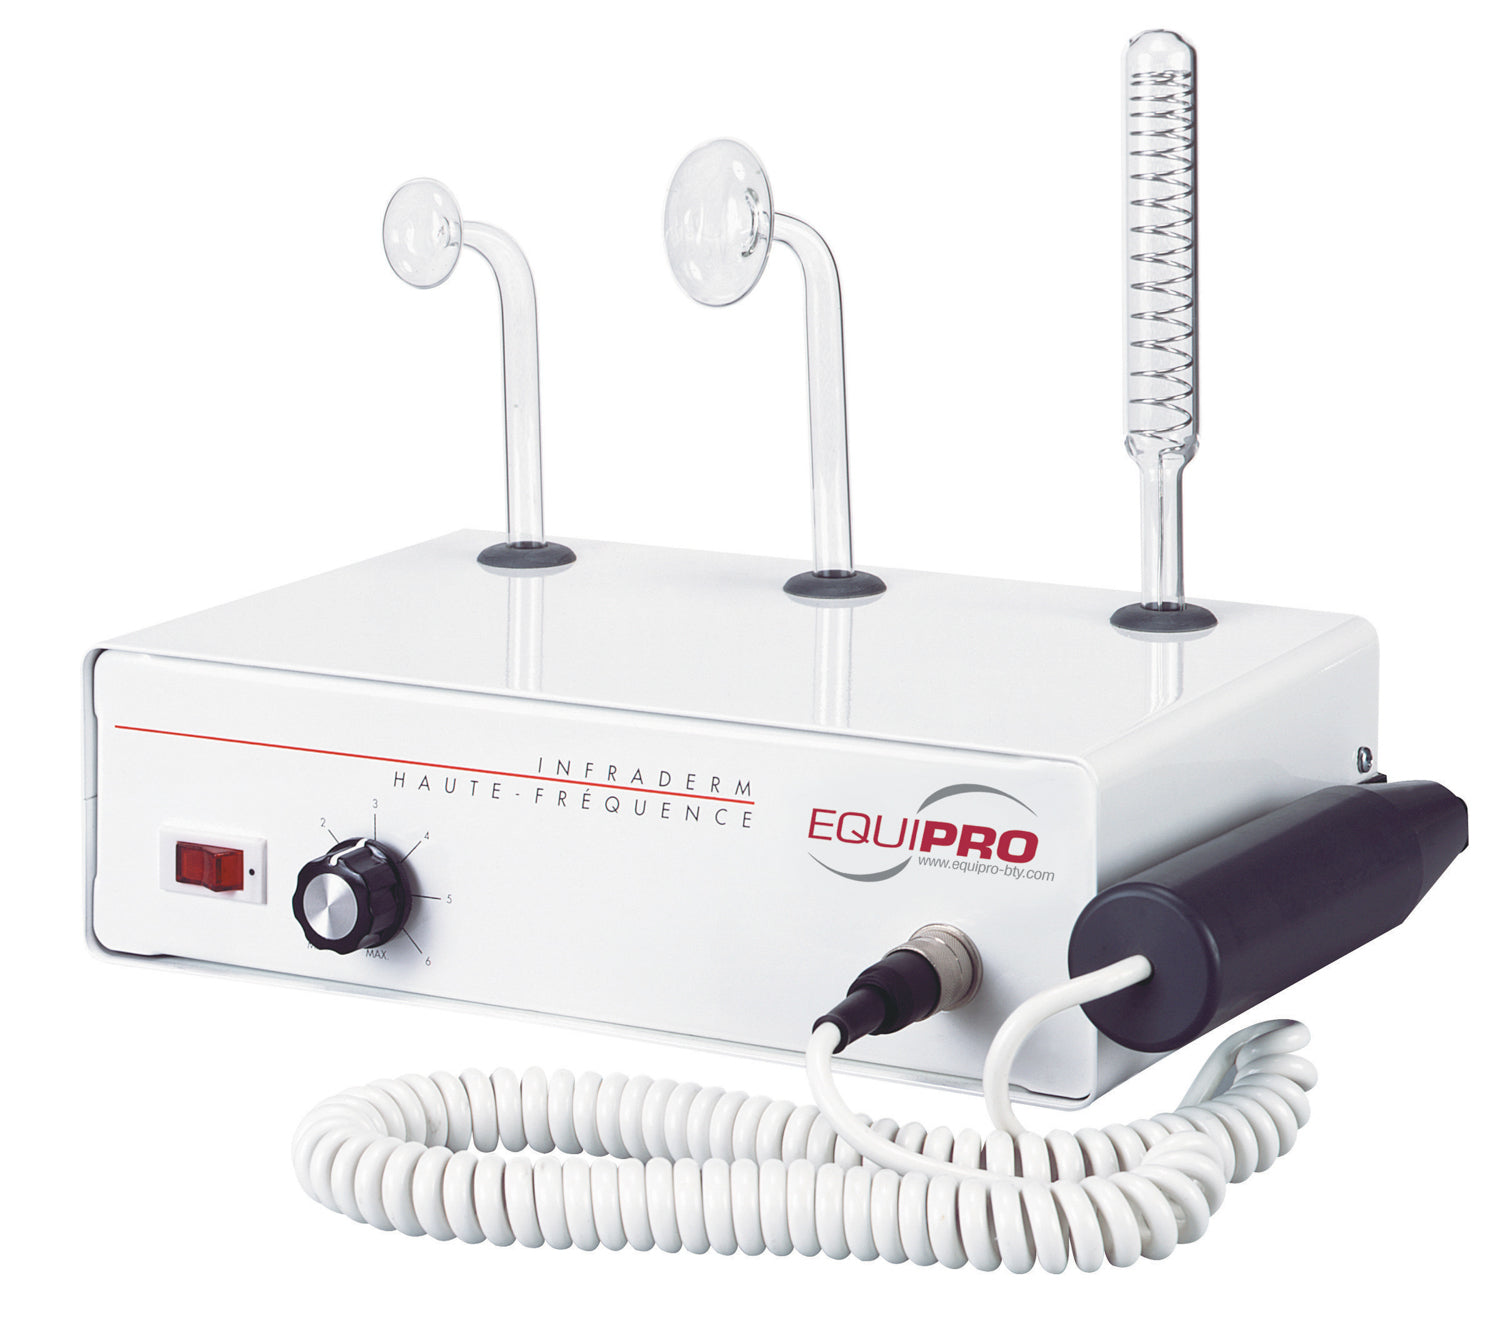 Equipro Infraderm - High-Frequency Facial Machine